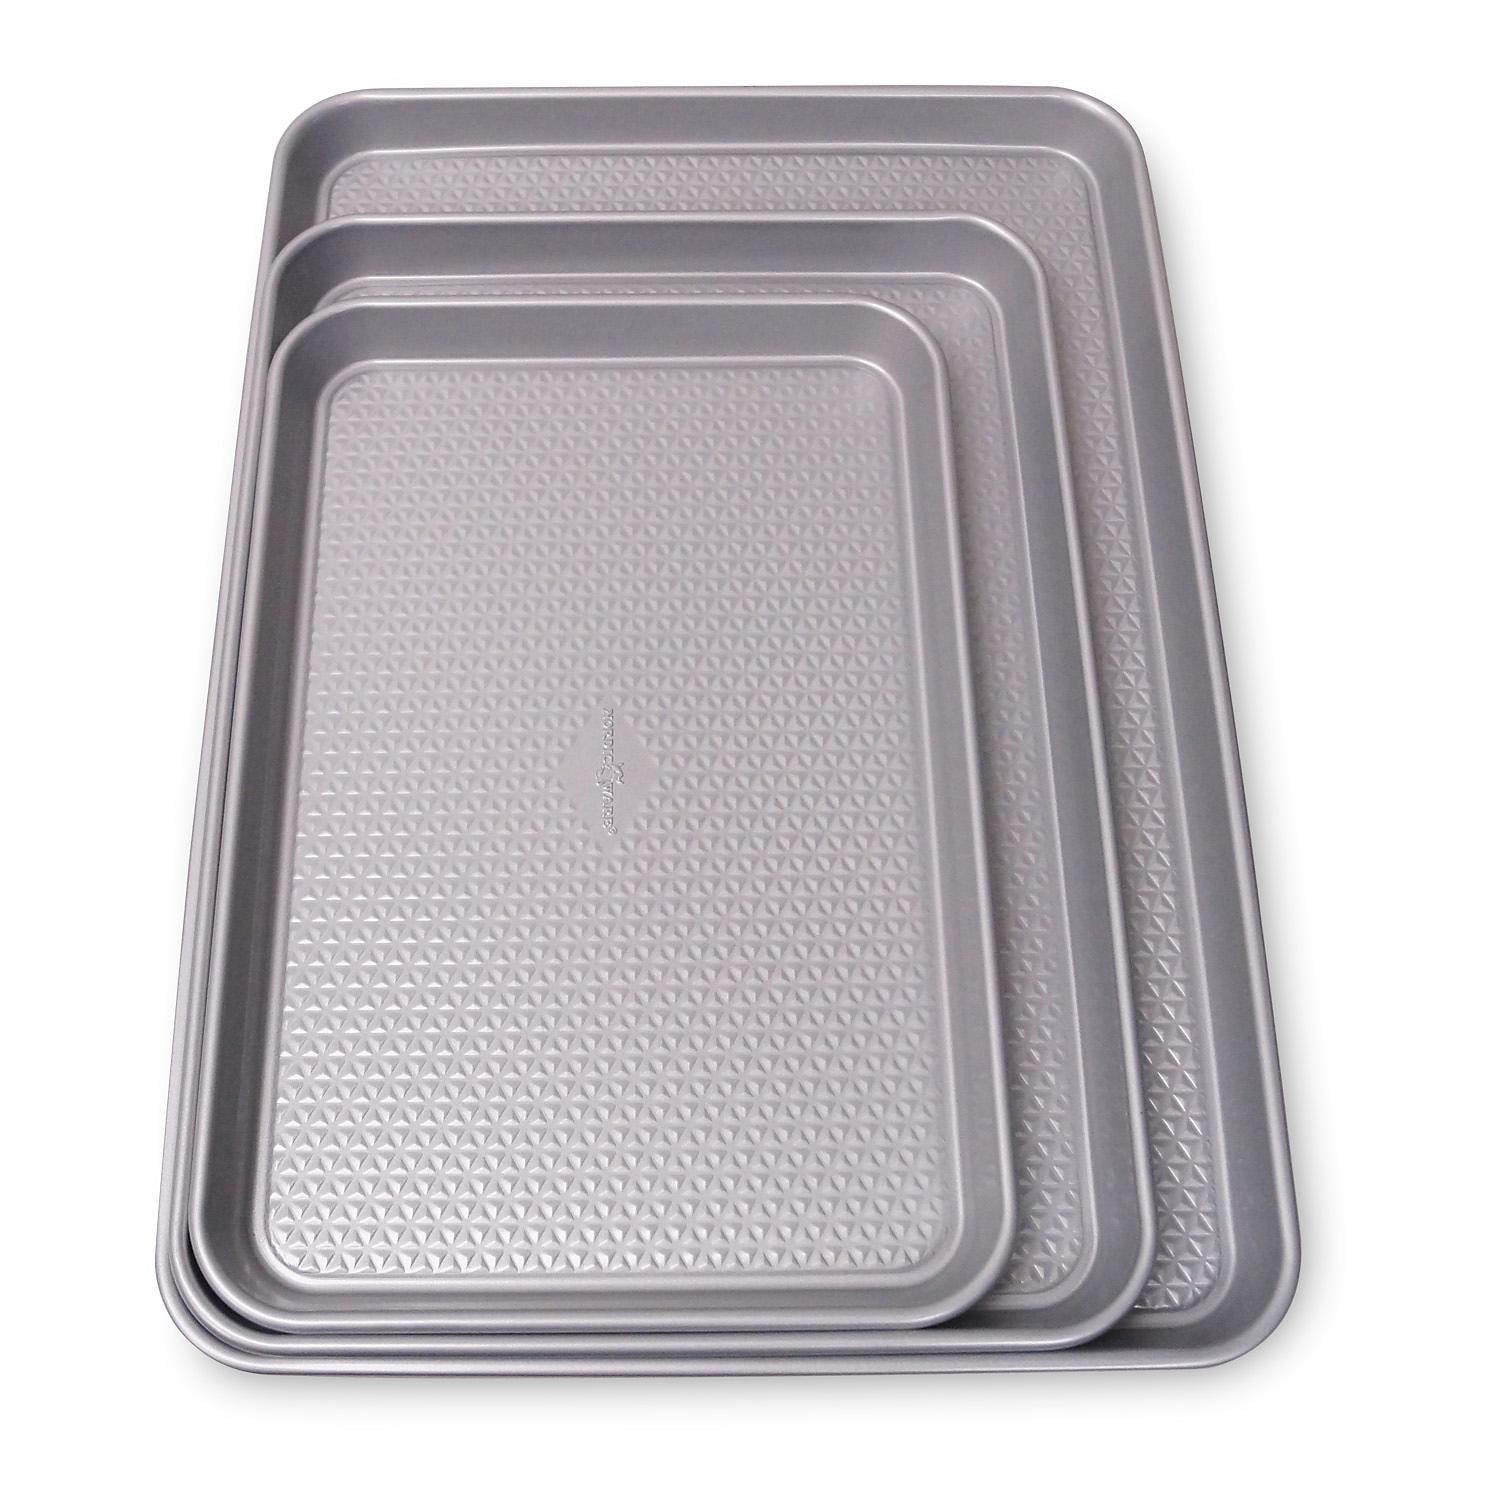 GoodCook® Covered Nonstick Cake Pan - Silver, 13 x 9 in - Fry's Food Stores